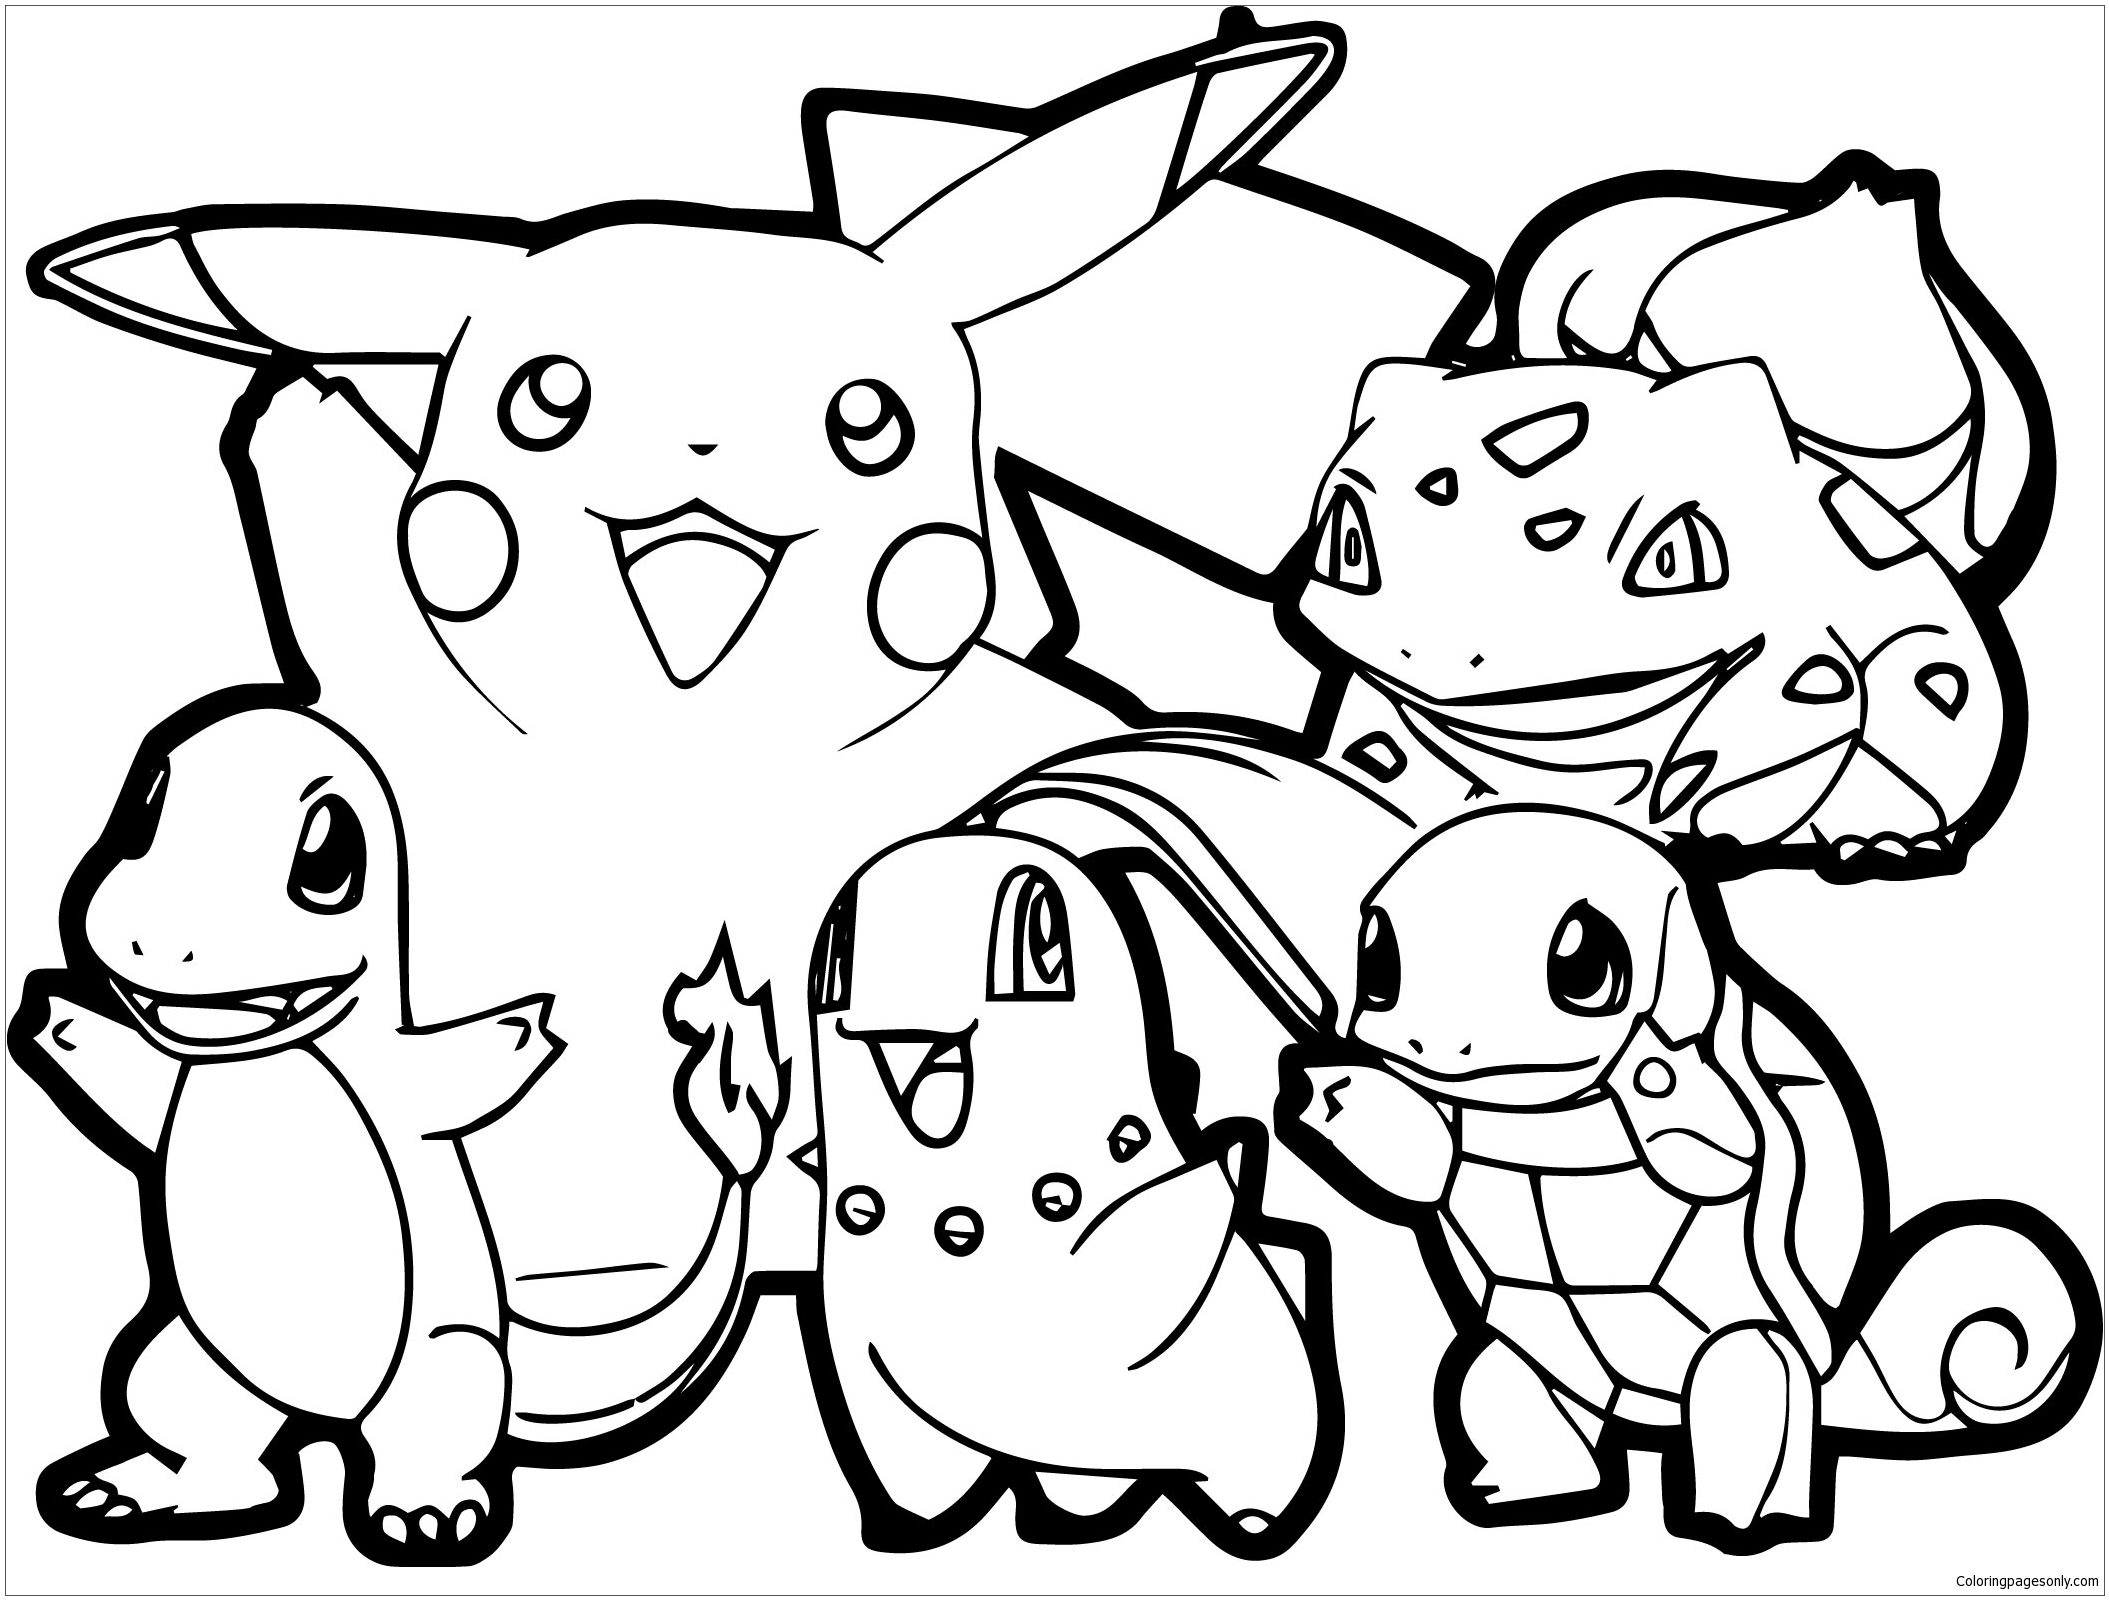 Adult Pokemon Coloring Page - Free Coloring Pages Online